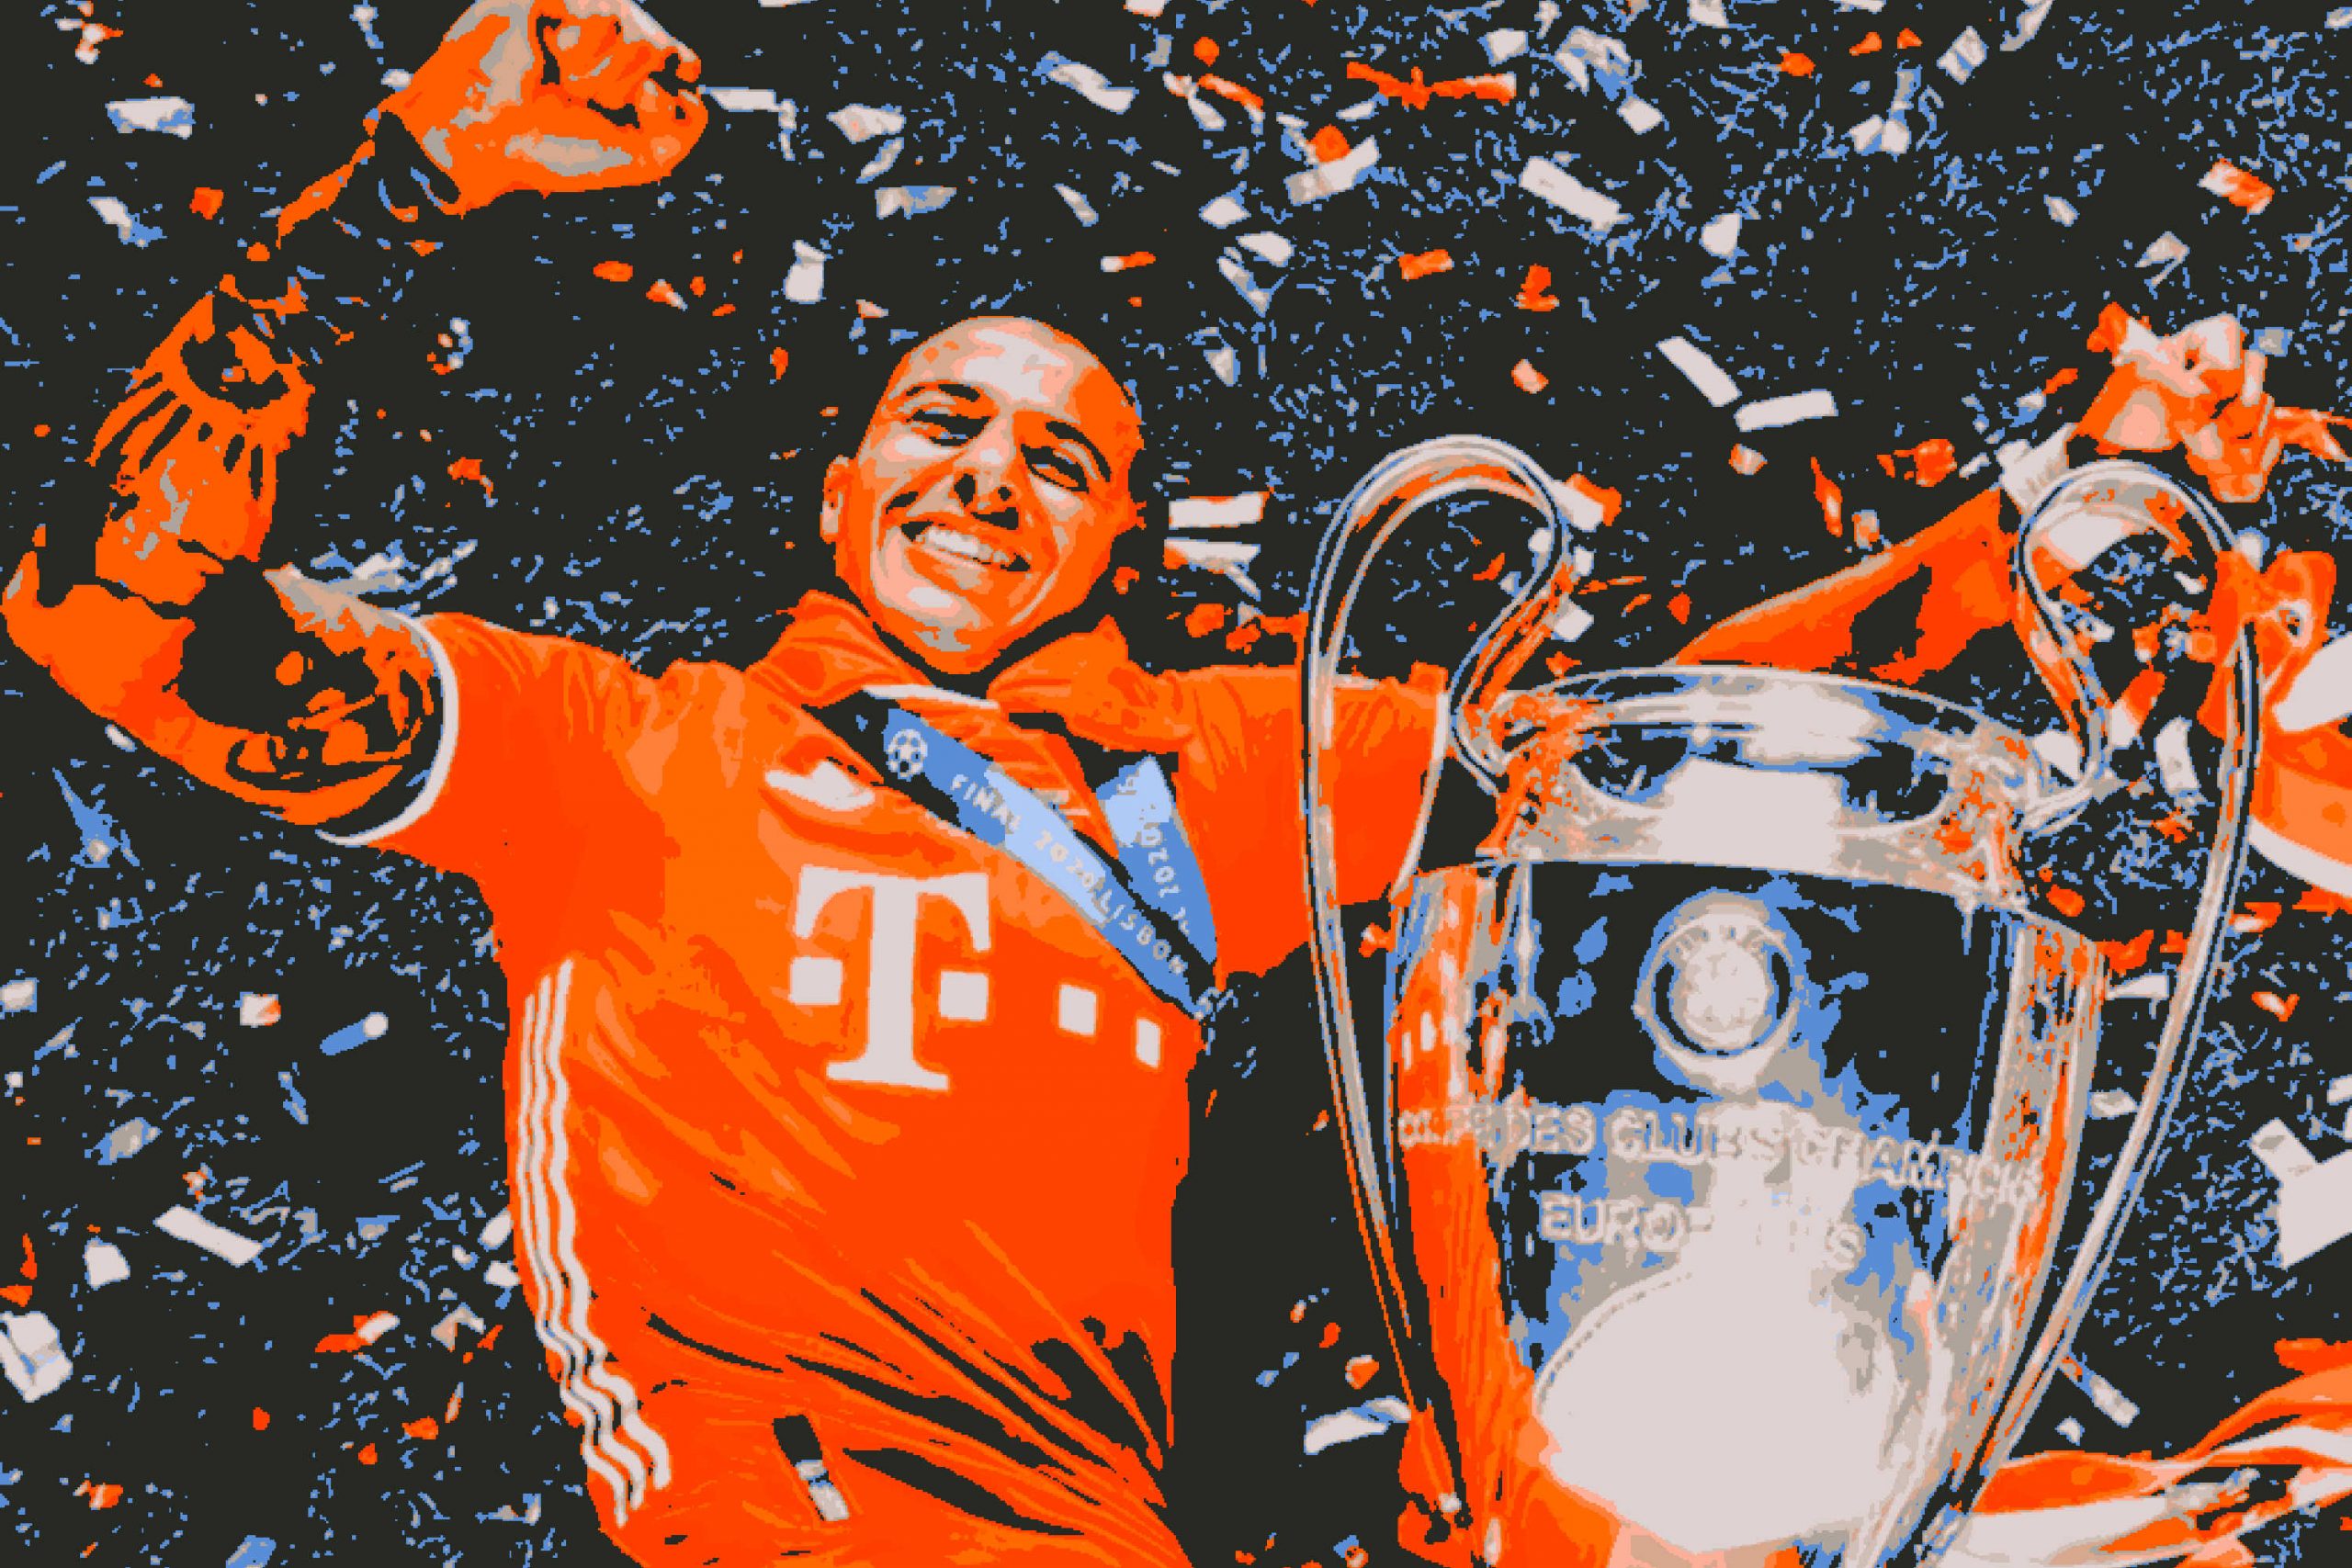 “Thiago will move to Liverpool, to Jurgen Klopp” – Highly regarded German news outlet confirms mega Reds transfer